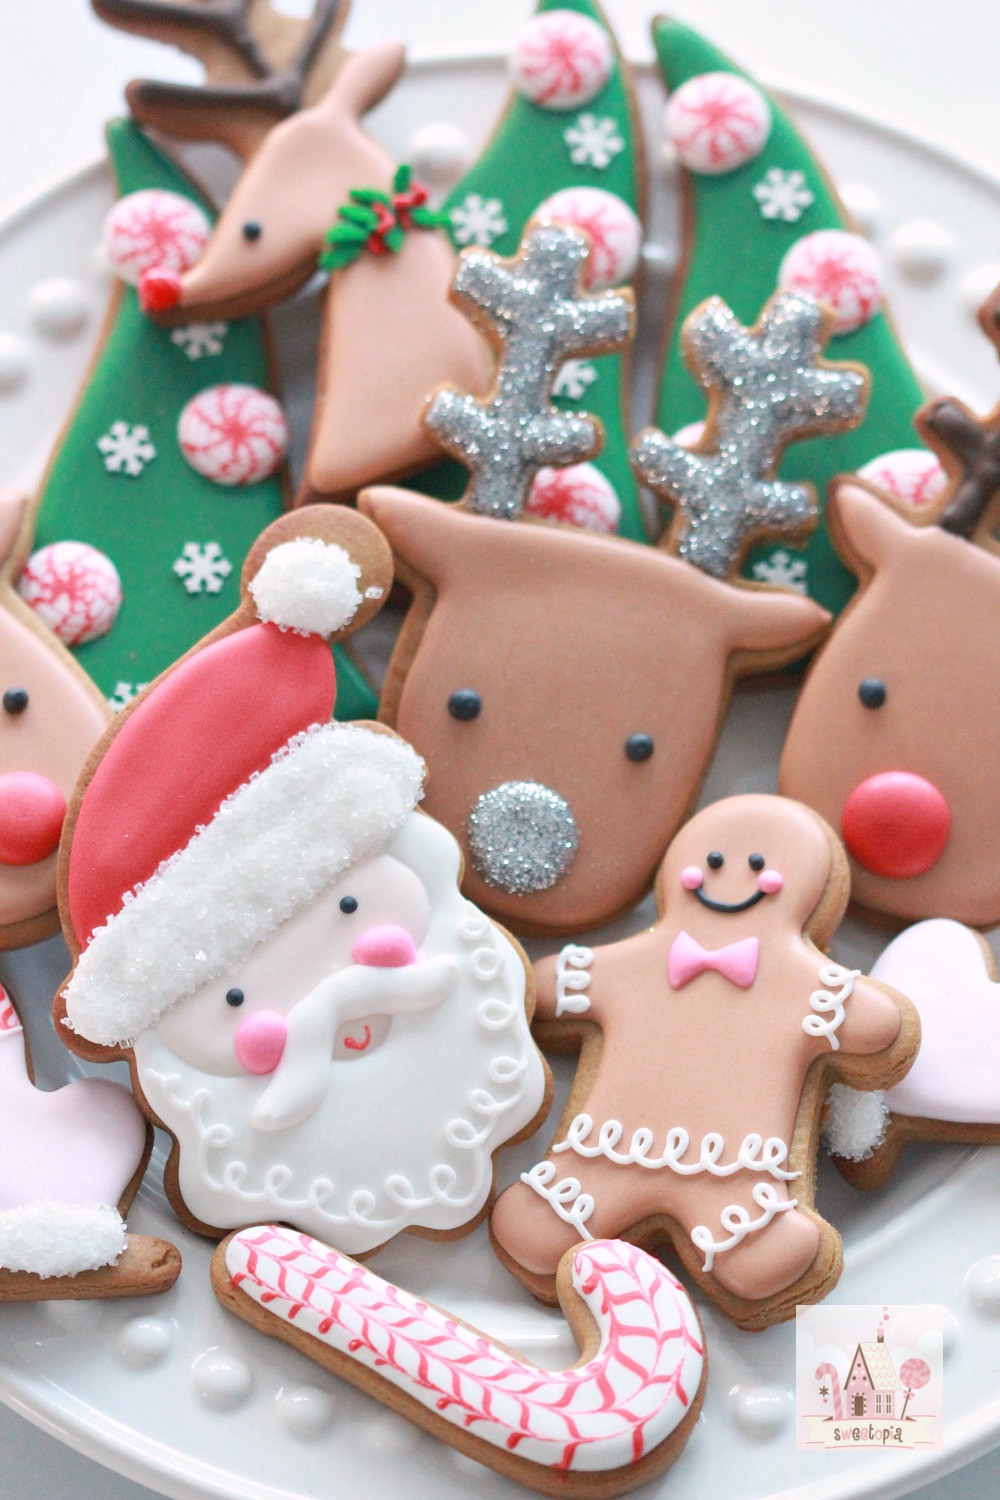 Royal Icing Christmas Cookie
 Video How to Decorate Christmas Cookies Simple Designs